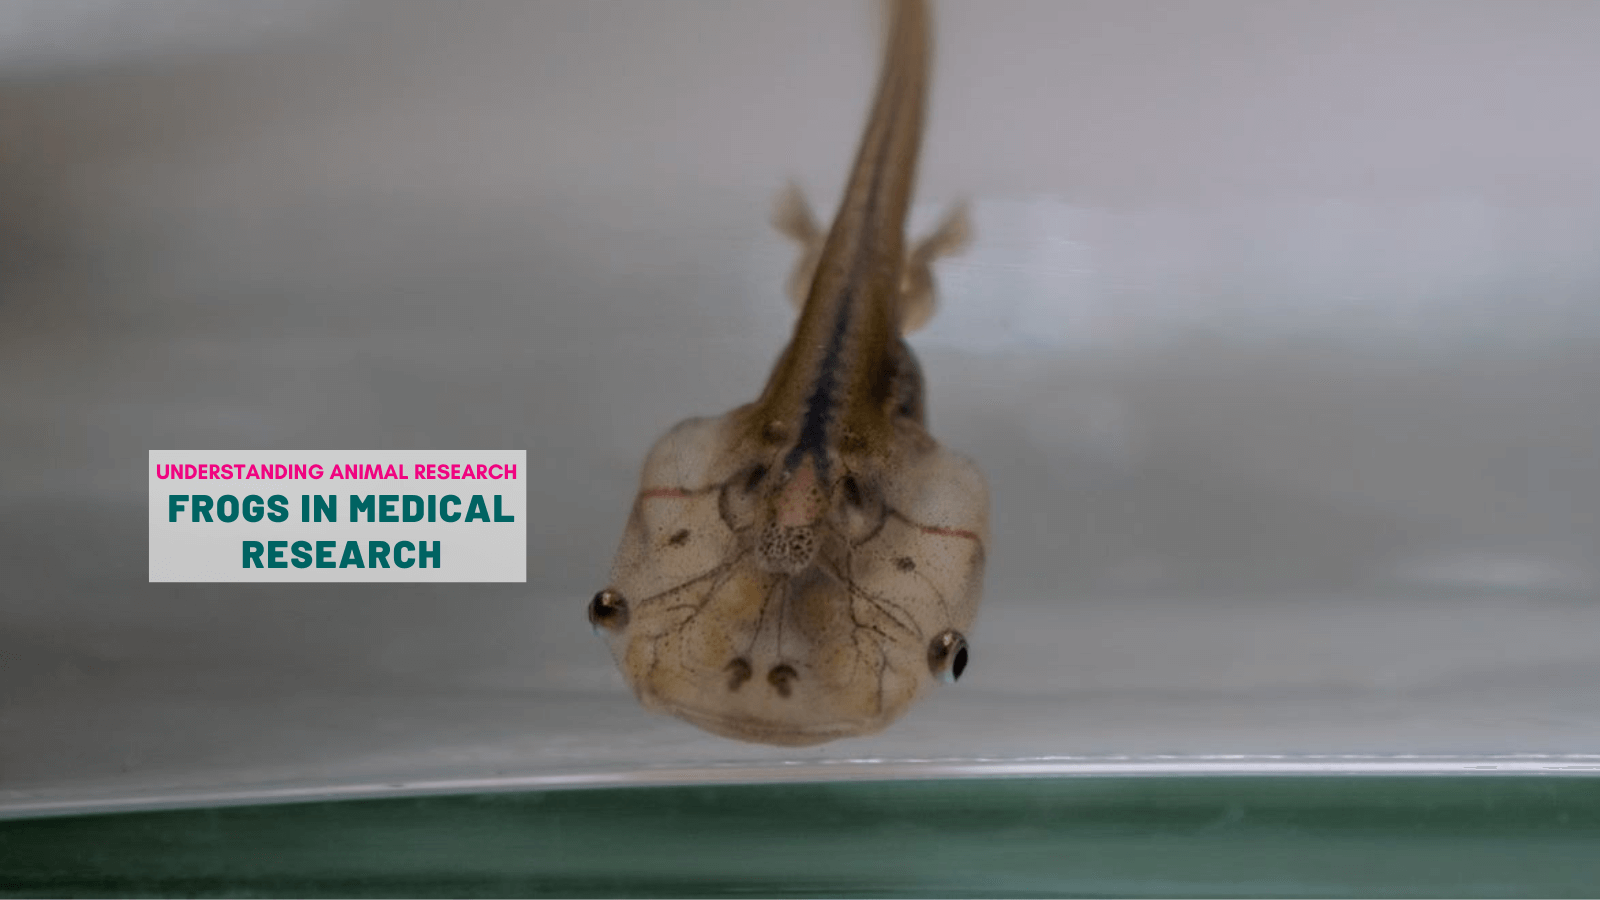 Frogs in medical research